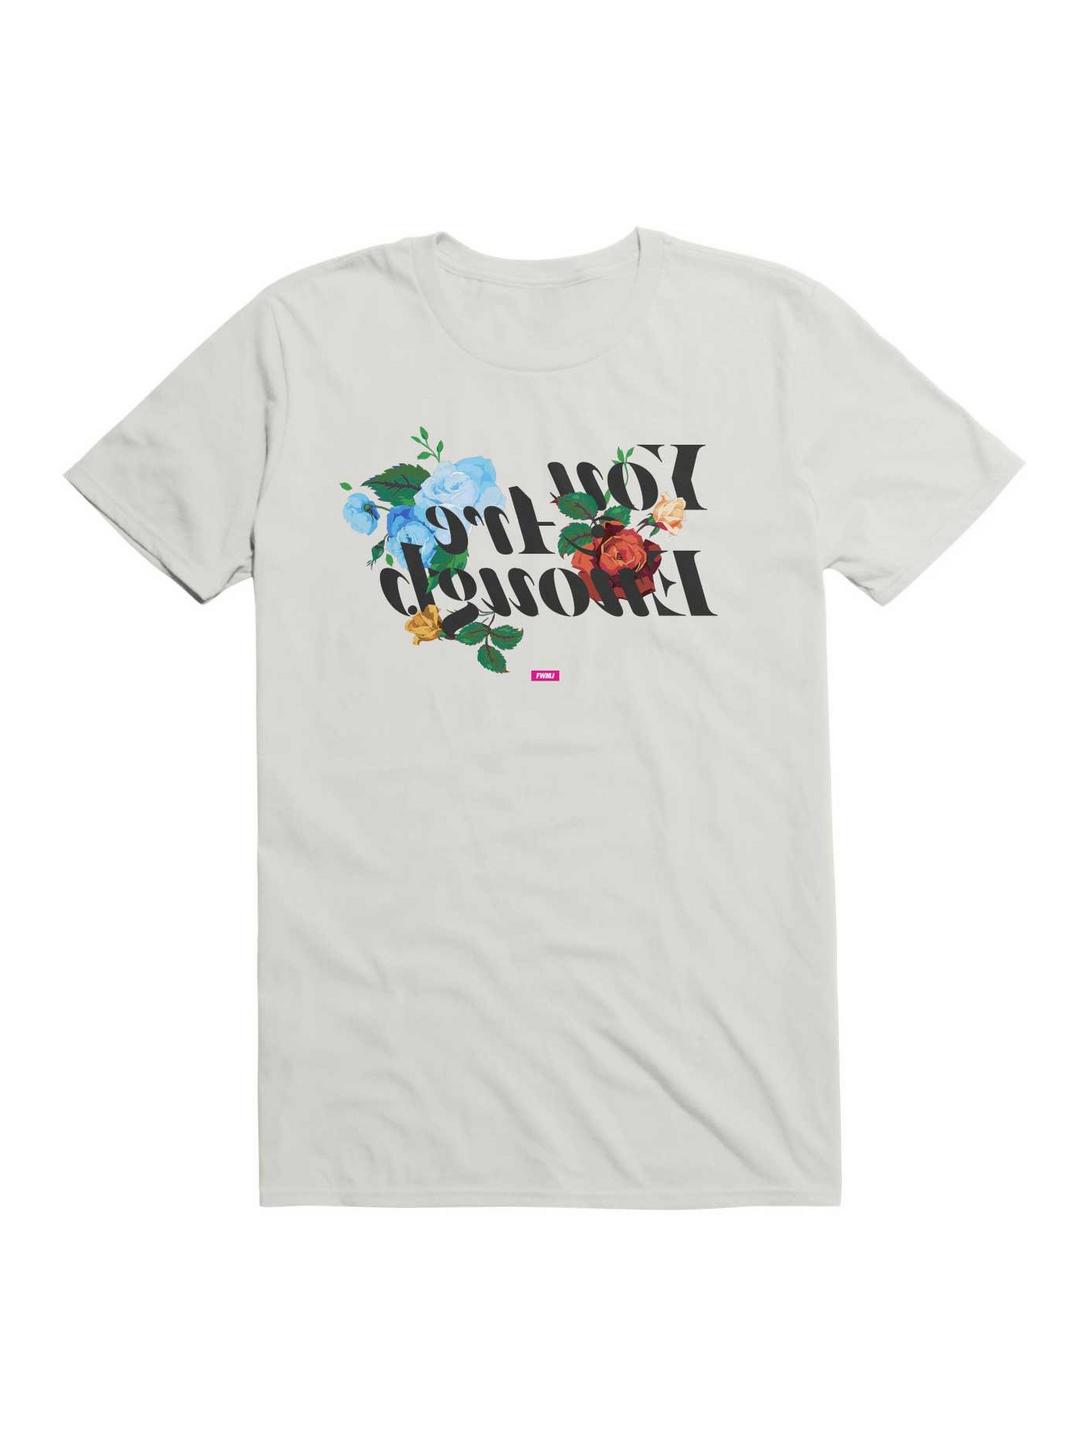 Black History Month FWMJ You Are Enough T-Shirt, WHITE, hi-res